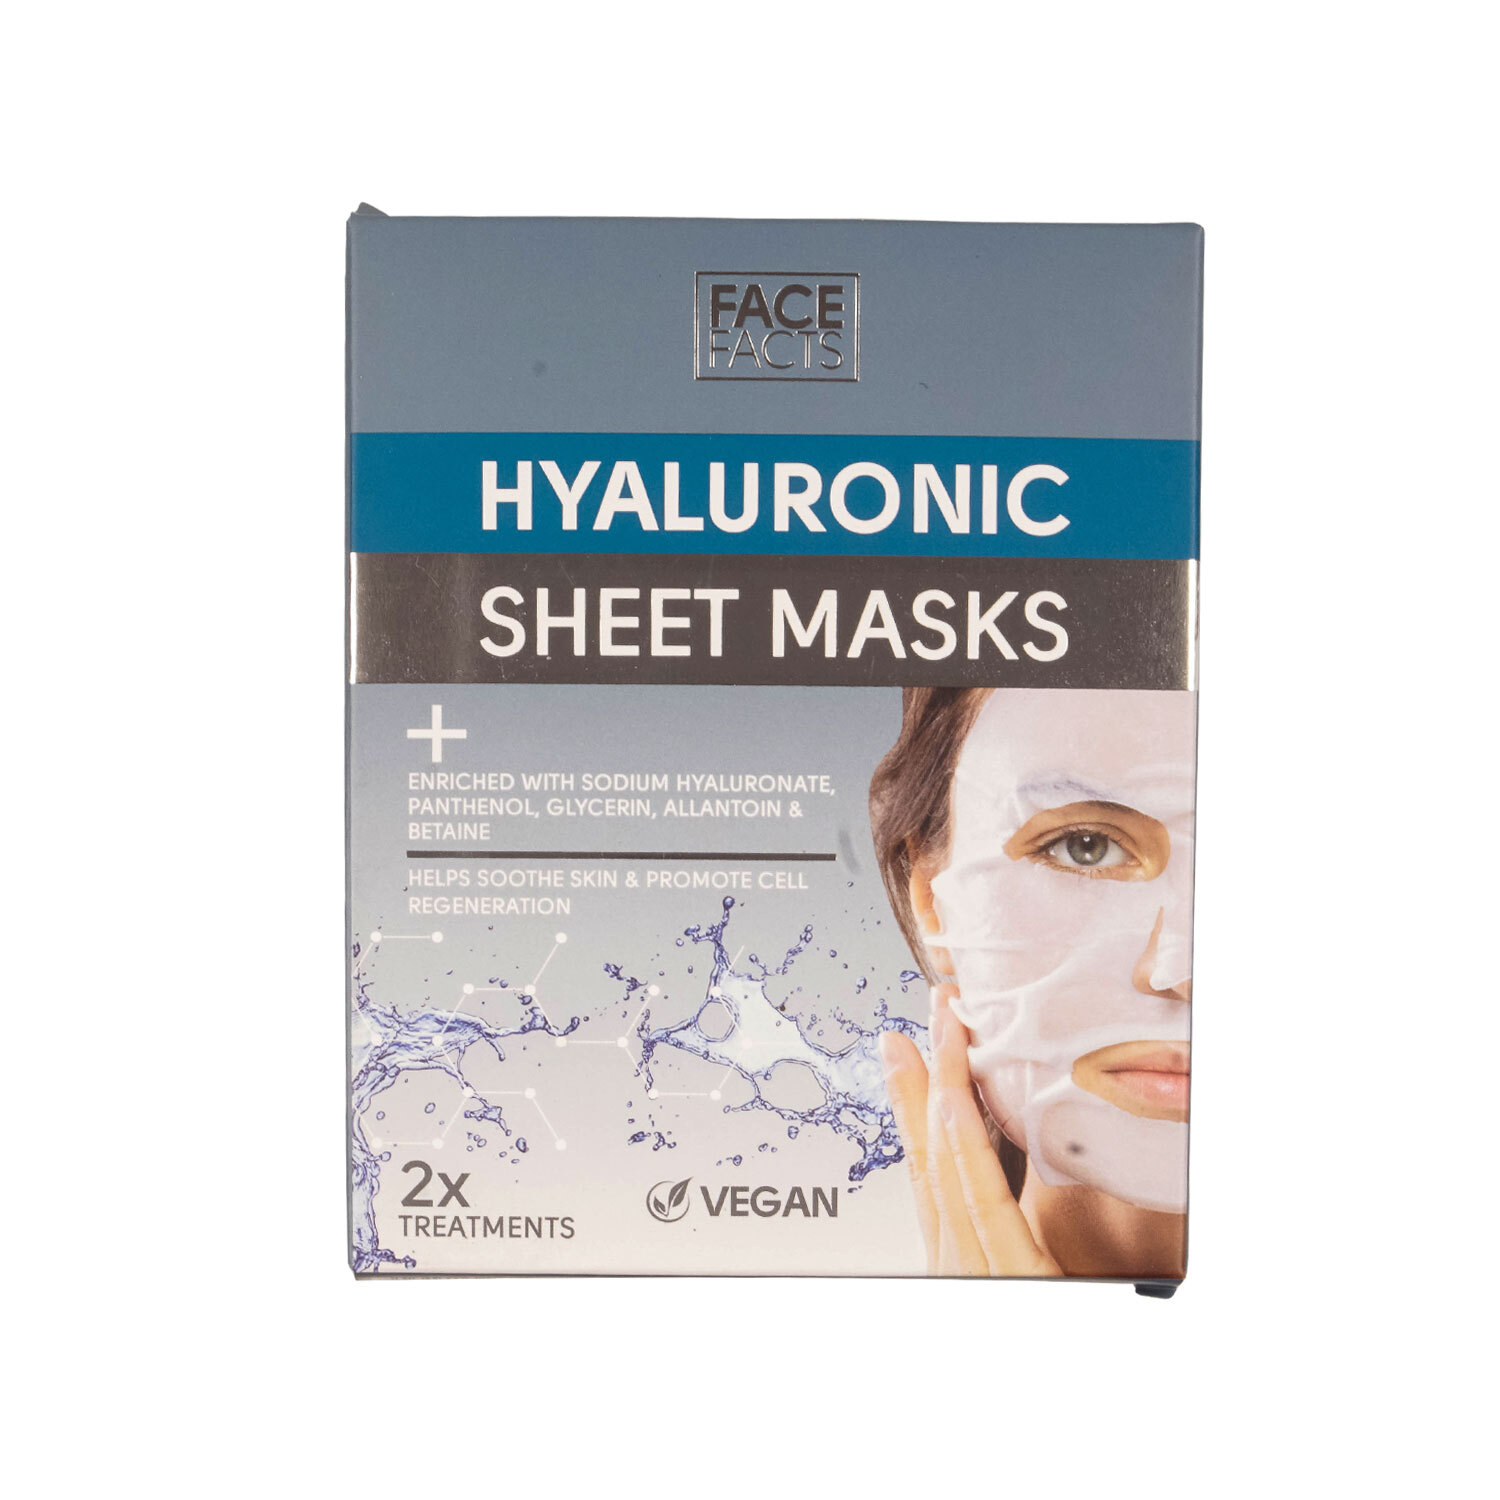 Face Facts Hyaluronic Sheet Mask Image